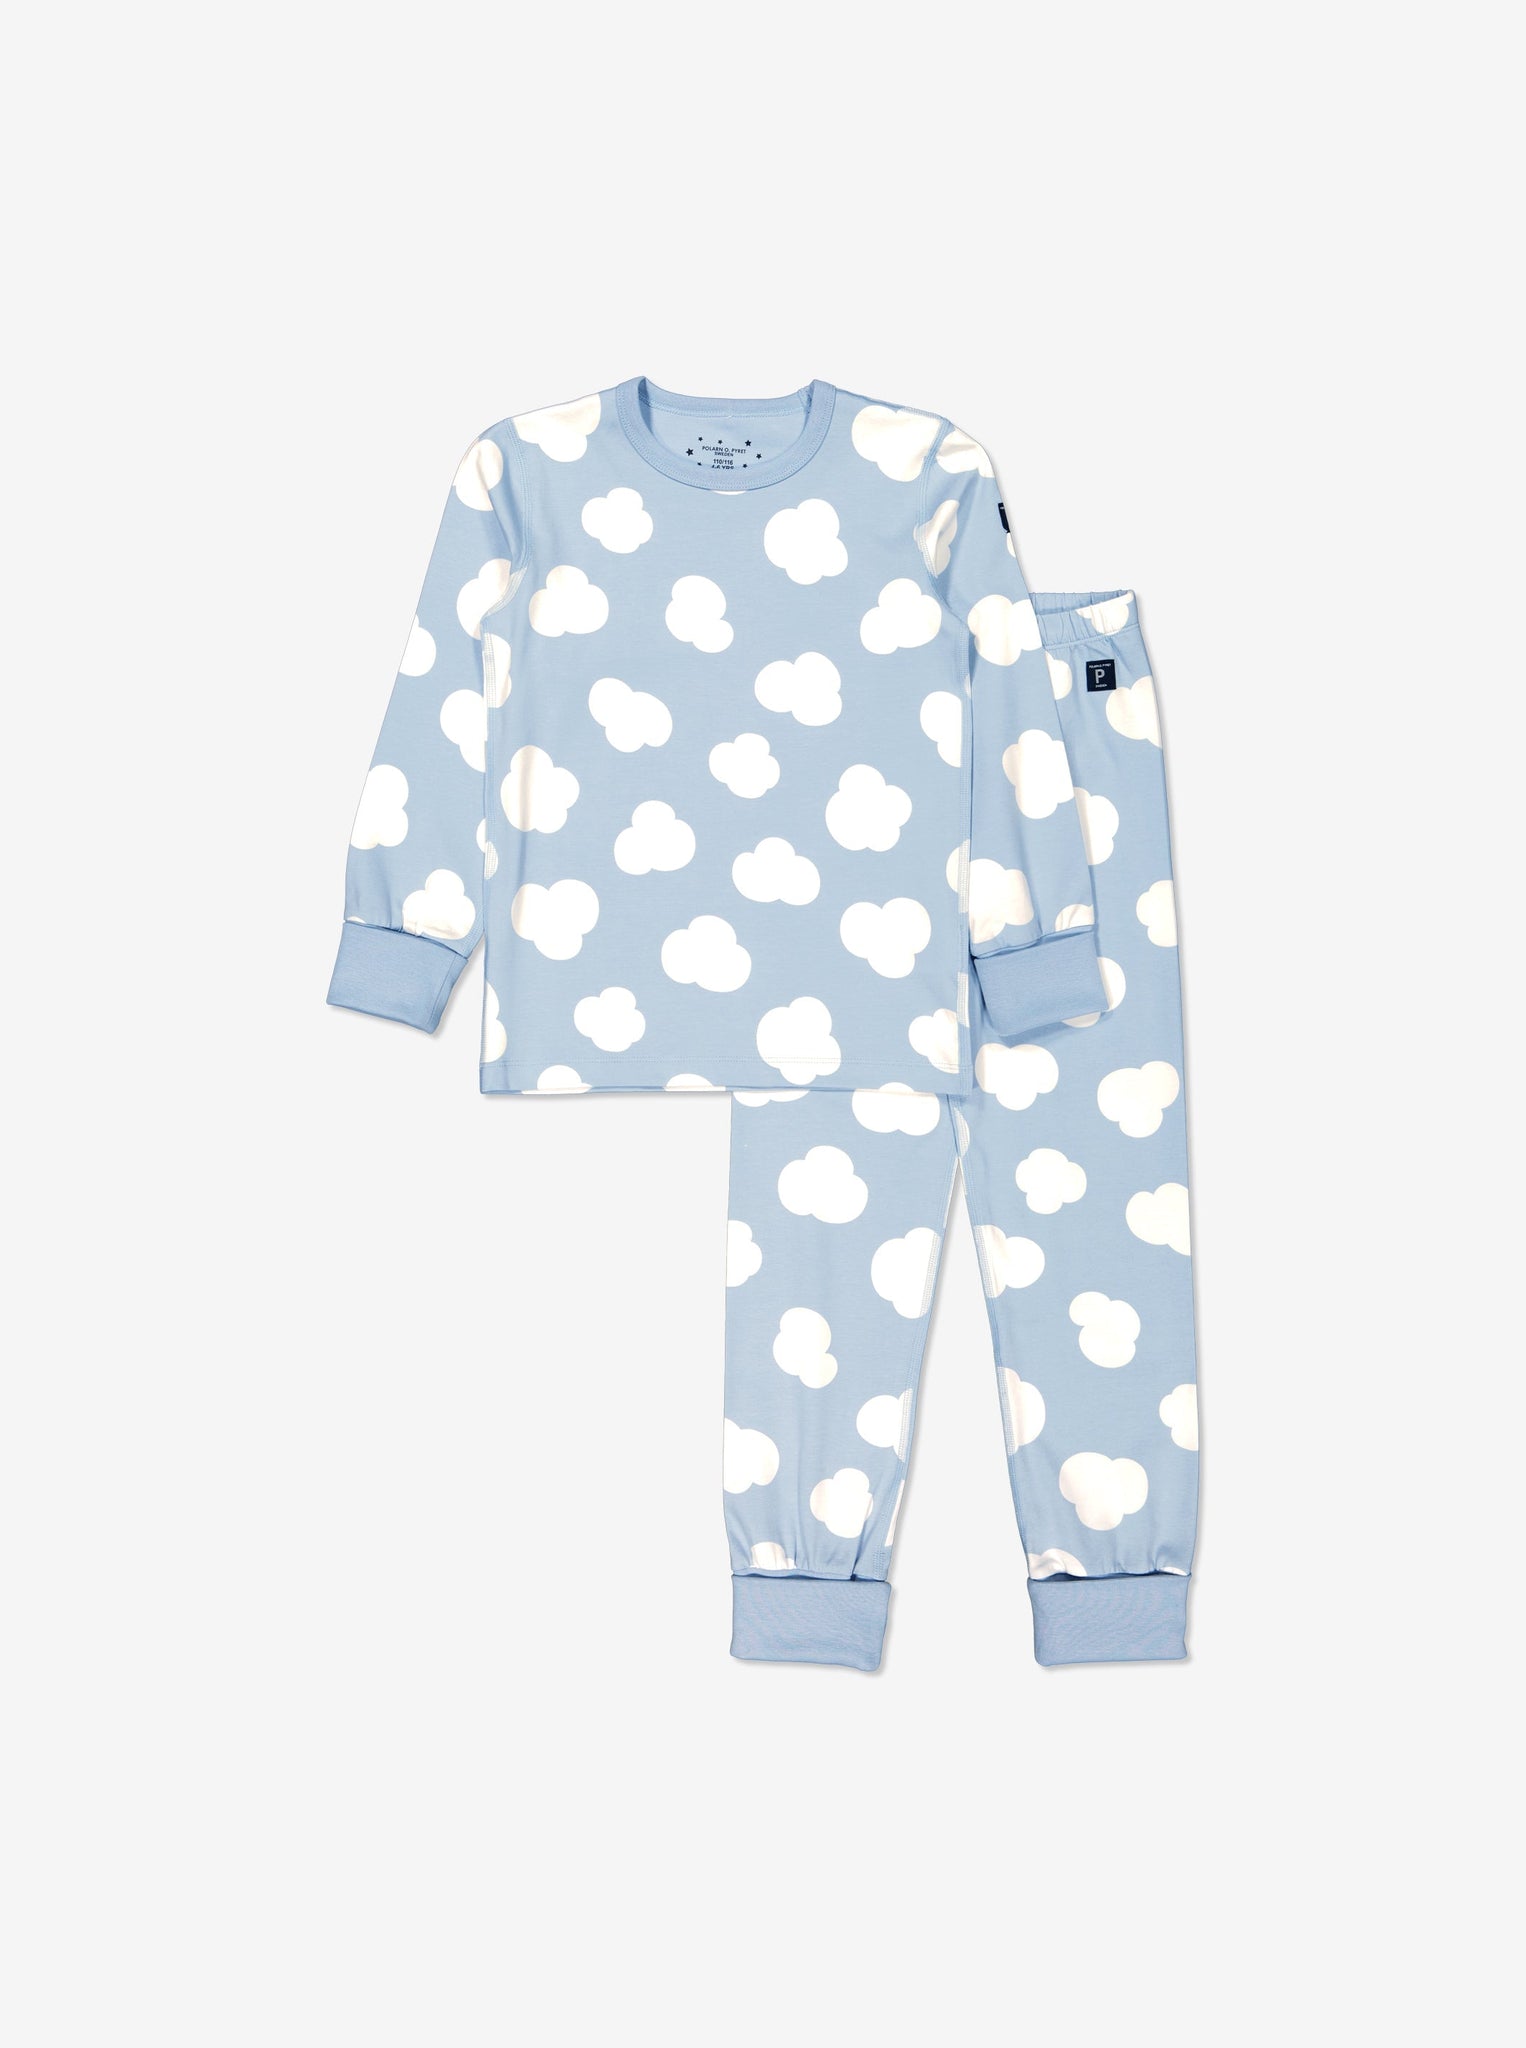  Cotton Cloud Print Kids Pyjamas from Polarn O. Pyret Kidswear. Made using ethically sourced materials.